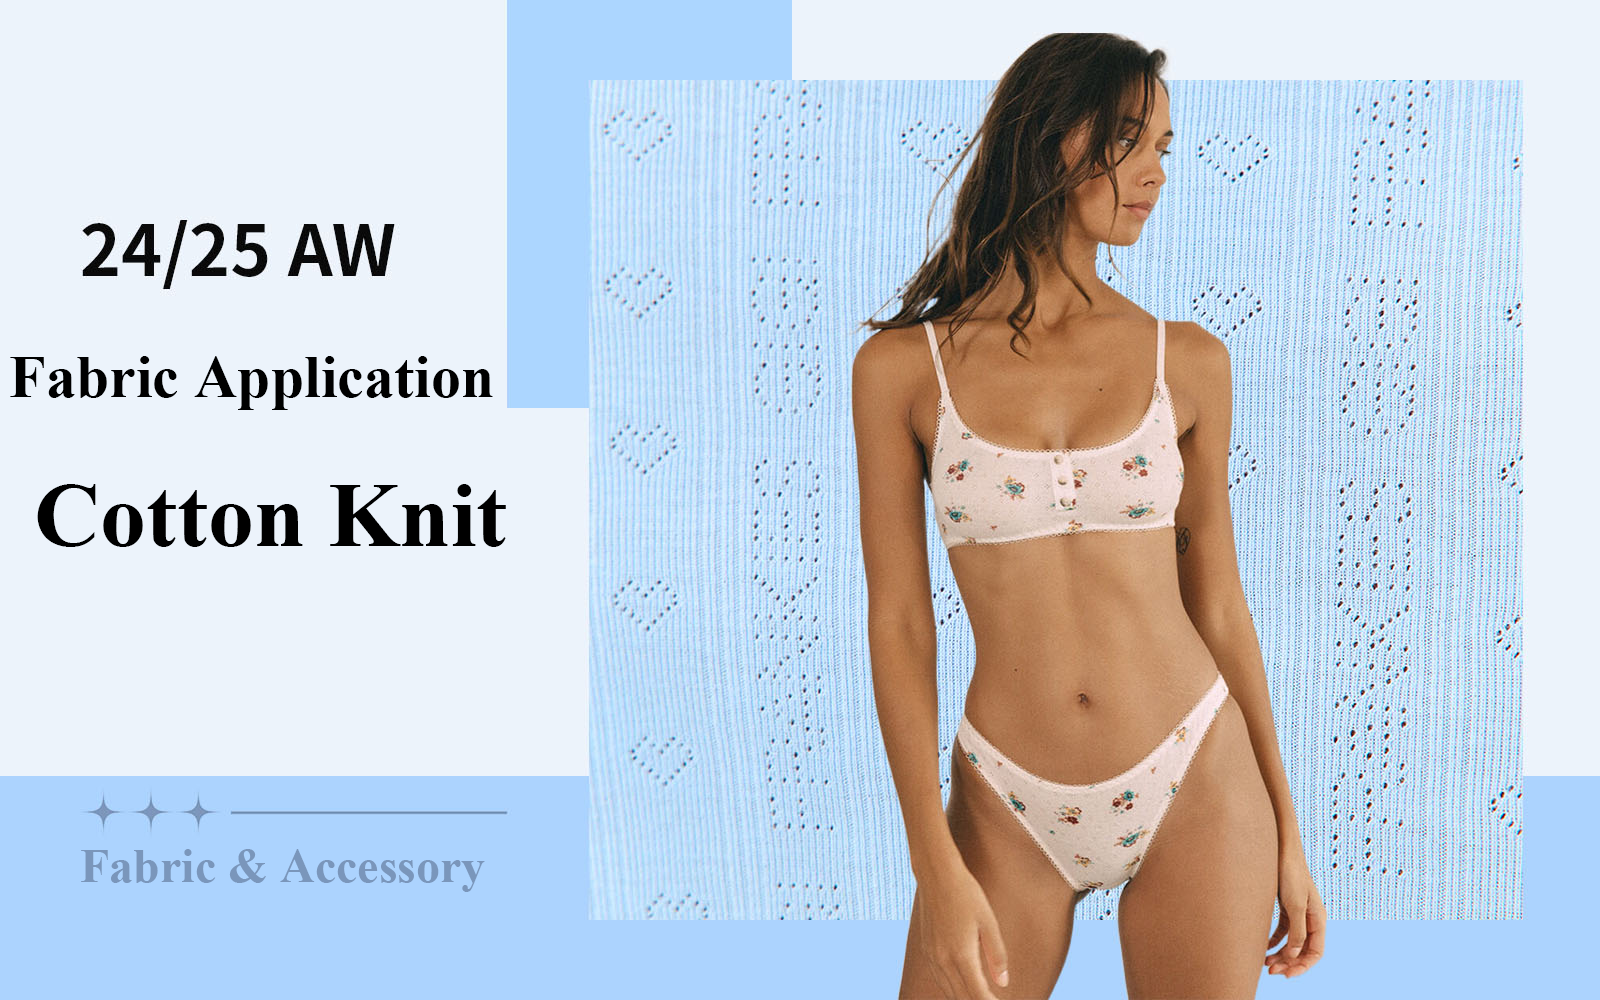 Cotton Knit -- The Fabric Trend for Women's Underwear